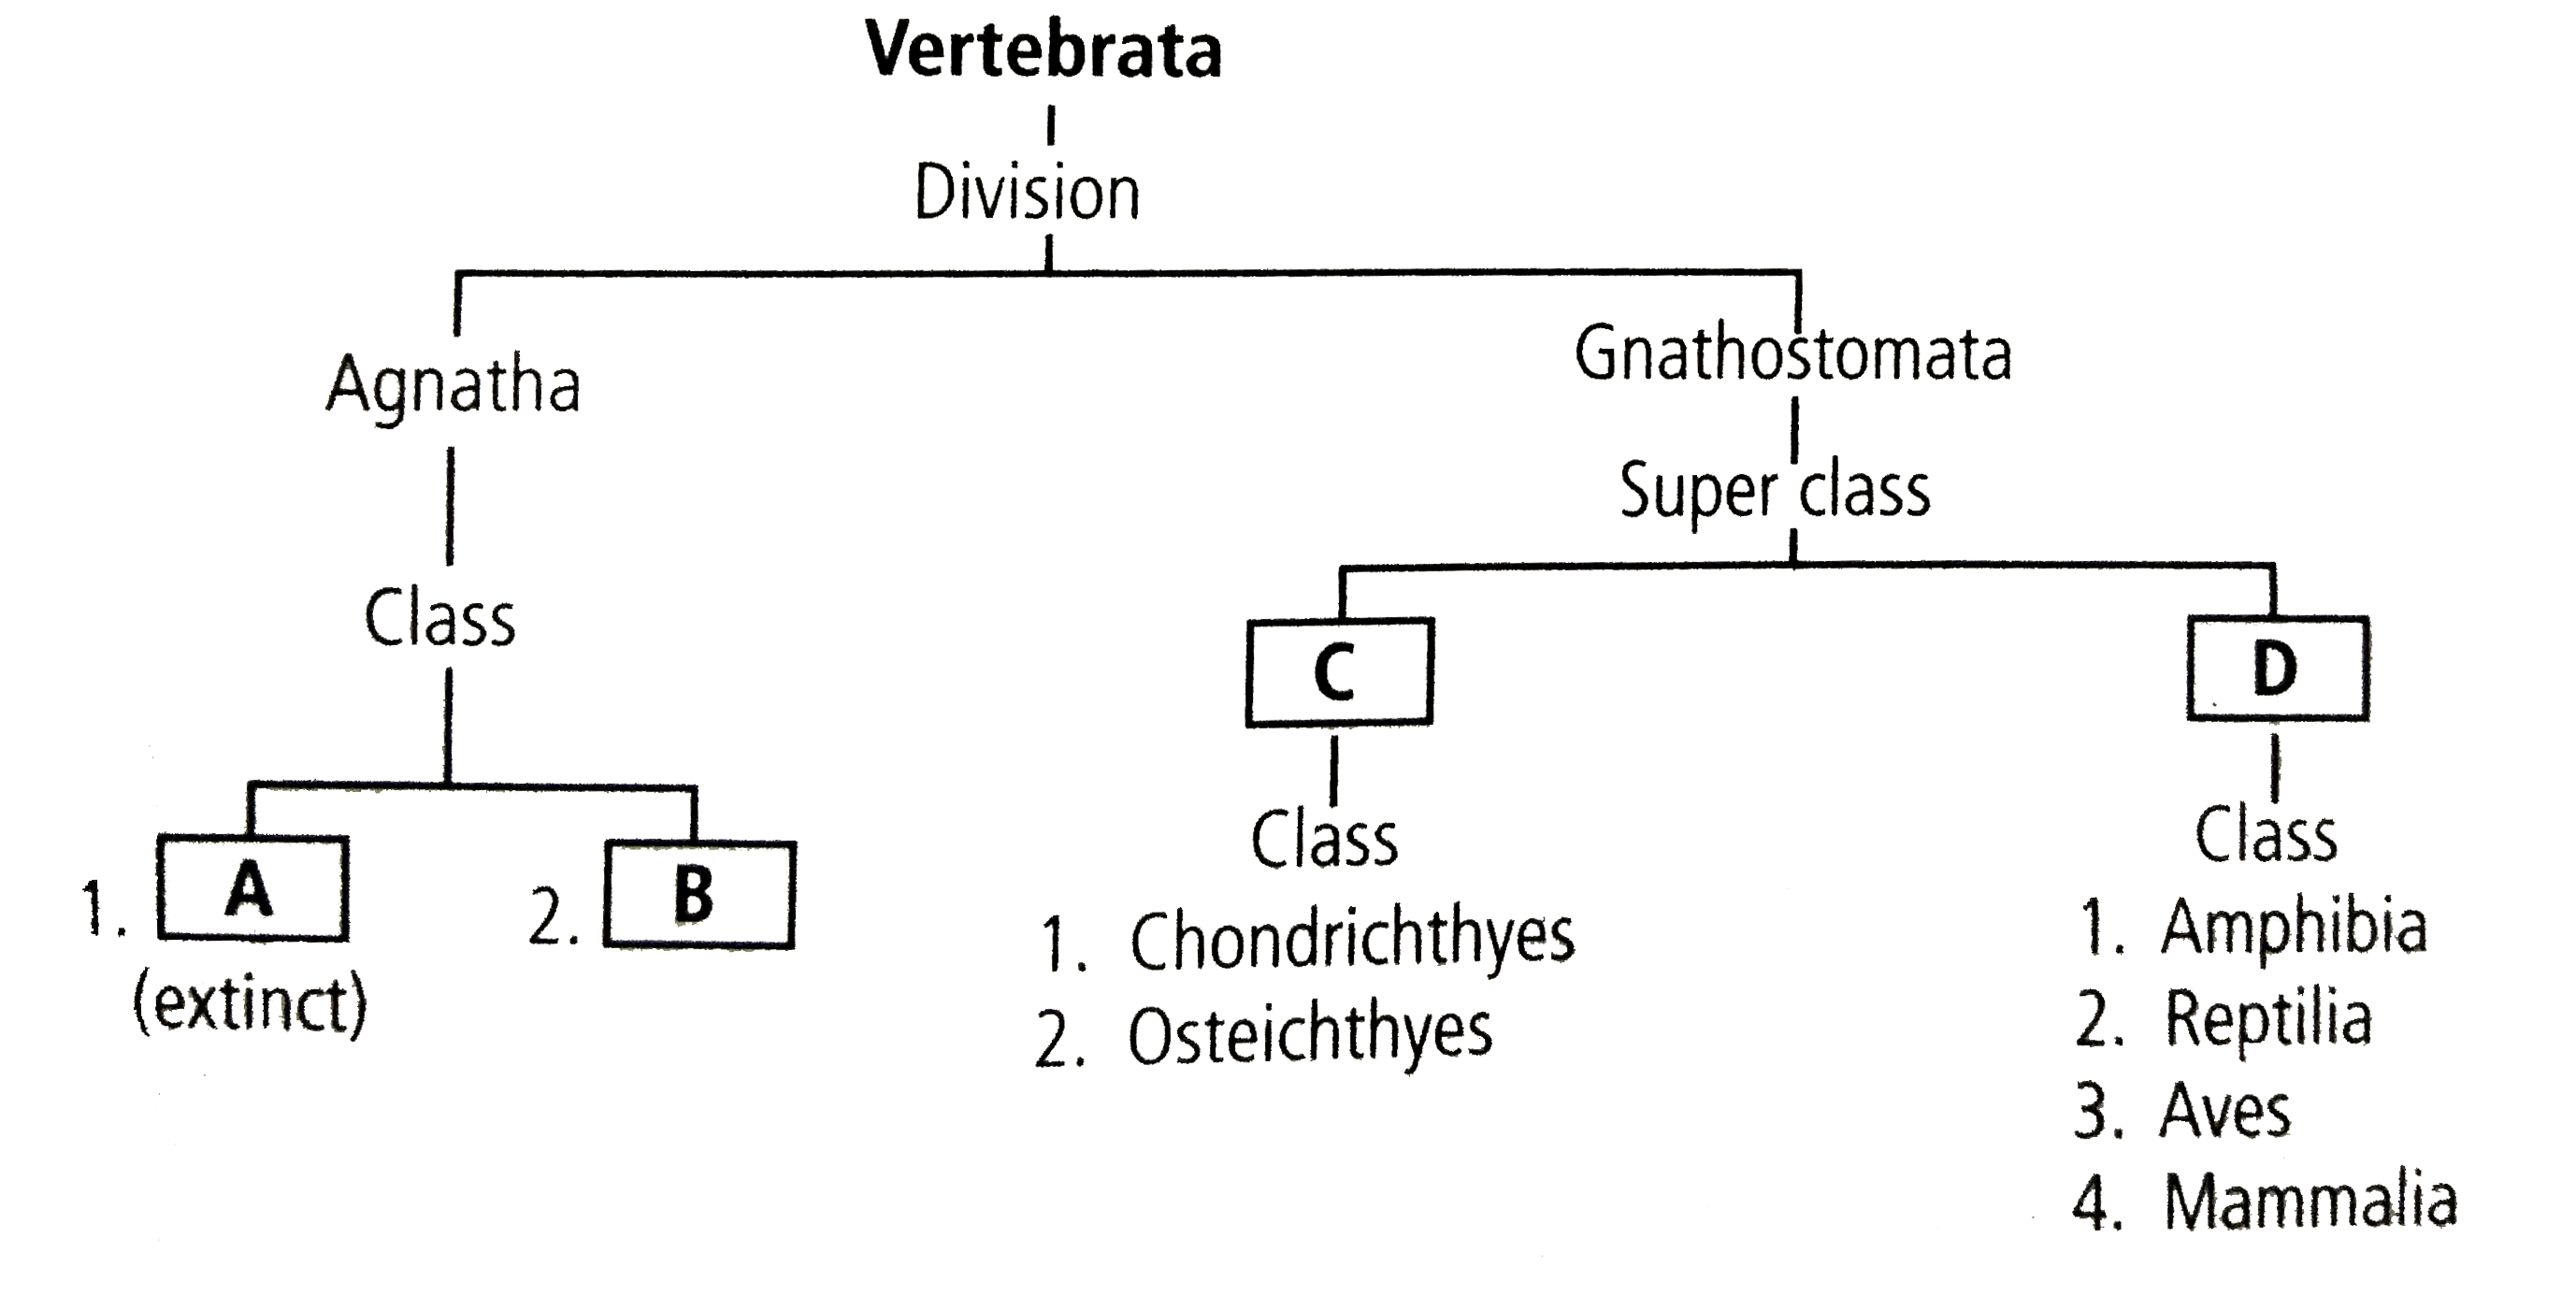 Go through the following flow chart for division of subphylum vertebrate. Fill the graph A, B, C and D and select the correct option.